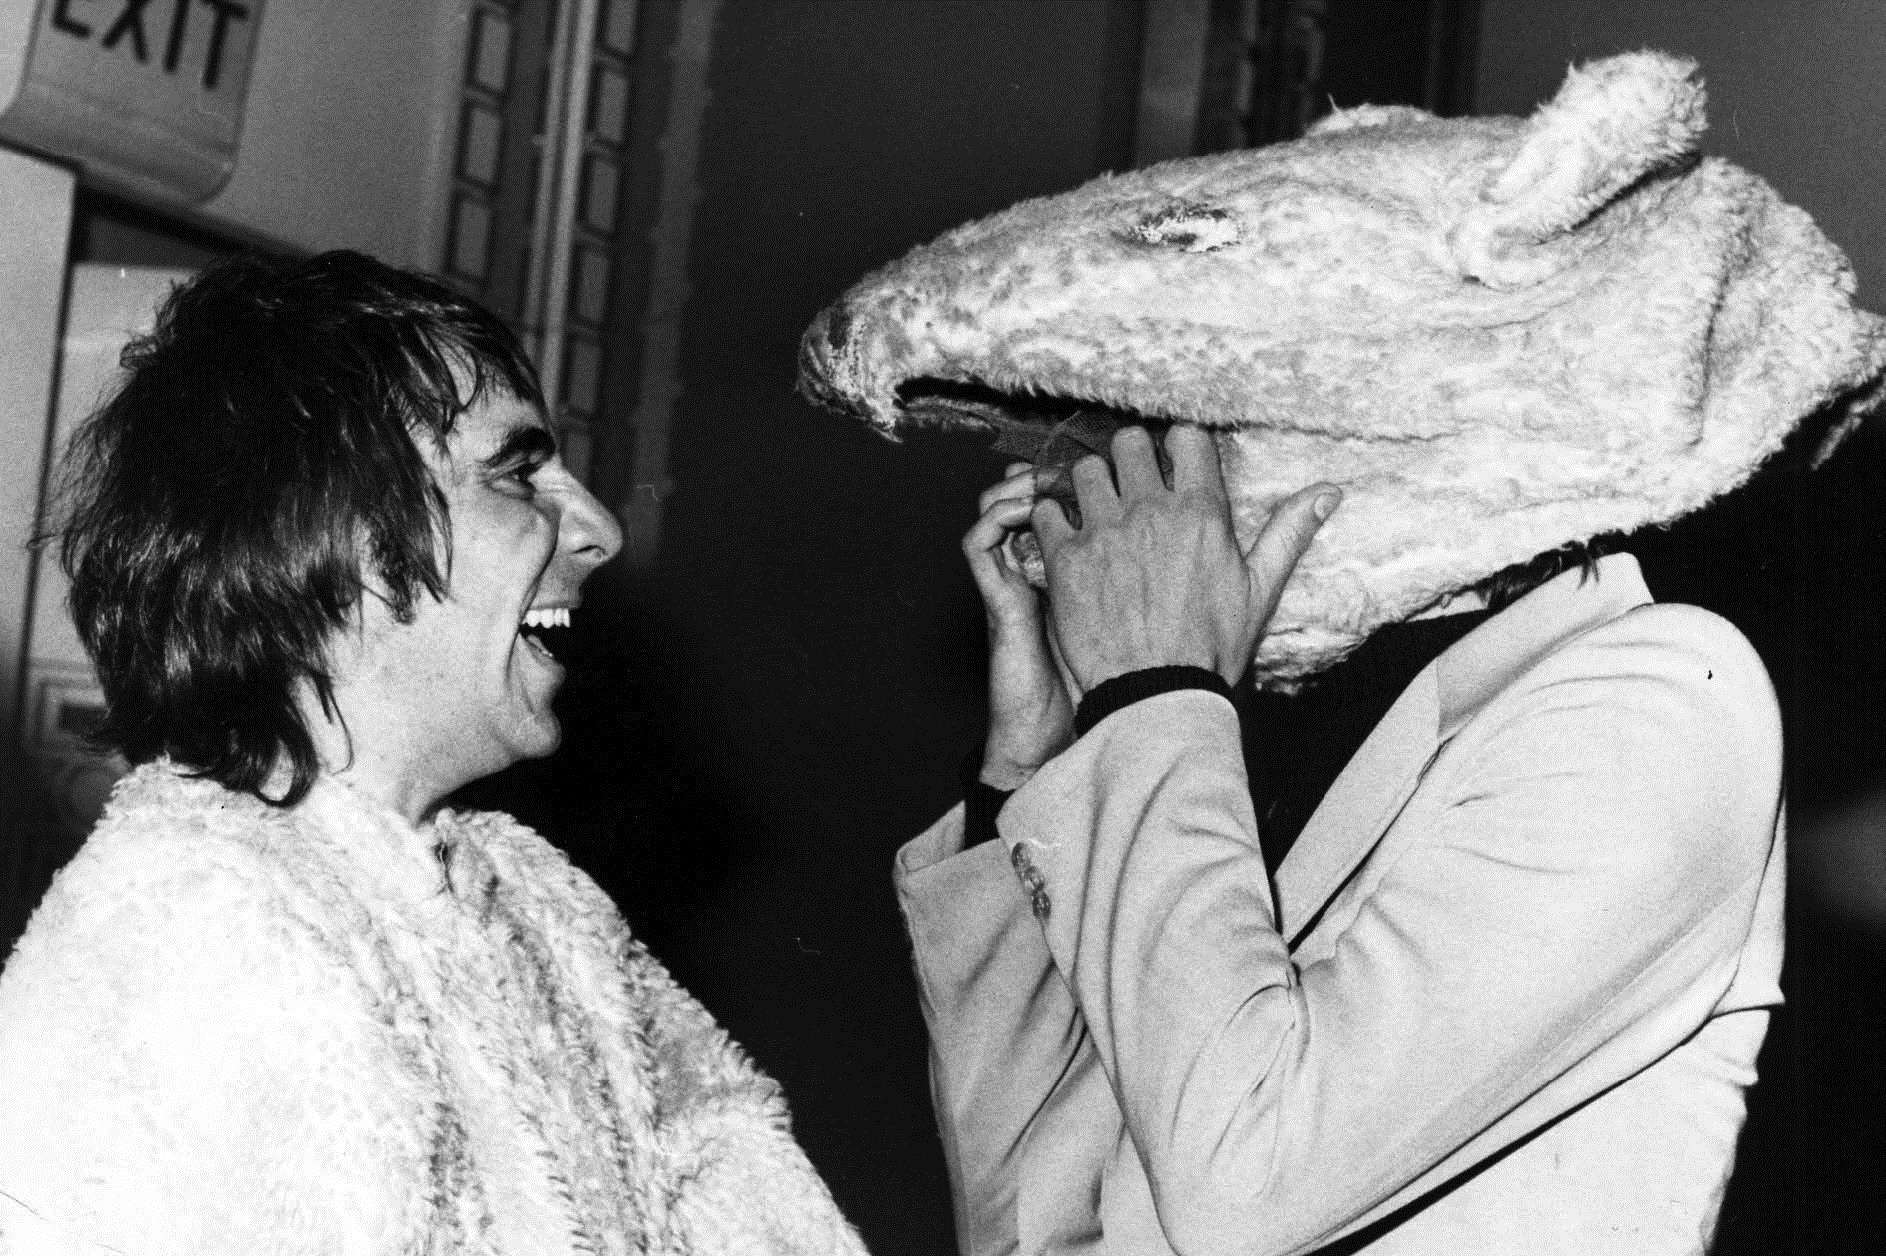 Always joking, The Who's wild drummer Keith Moon has placed a bear's head on Pete Townshend.